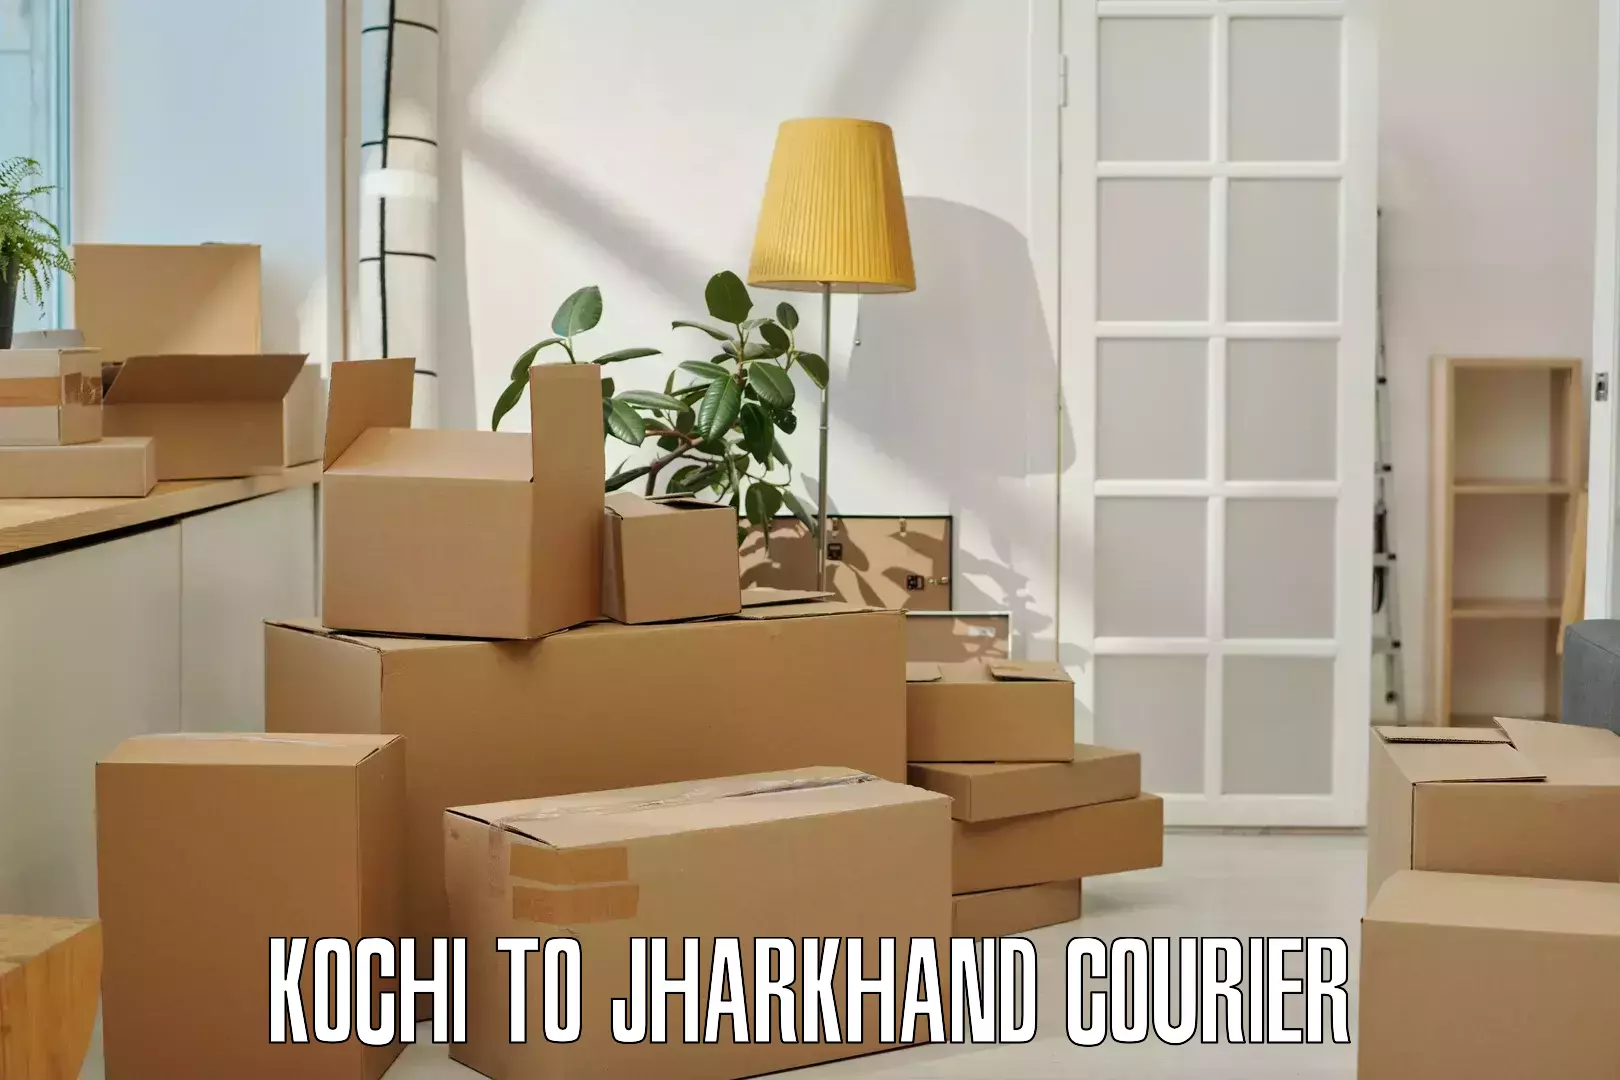 Nationwide delivery network Kochi to Jharkhand